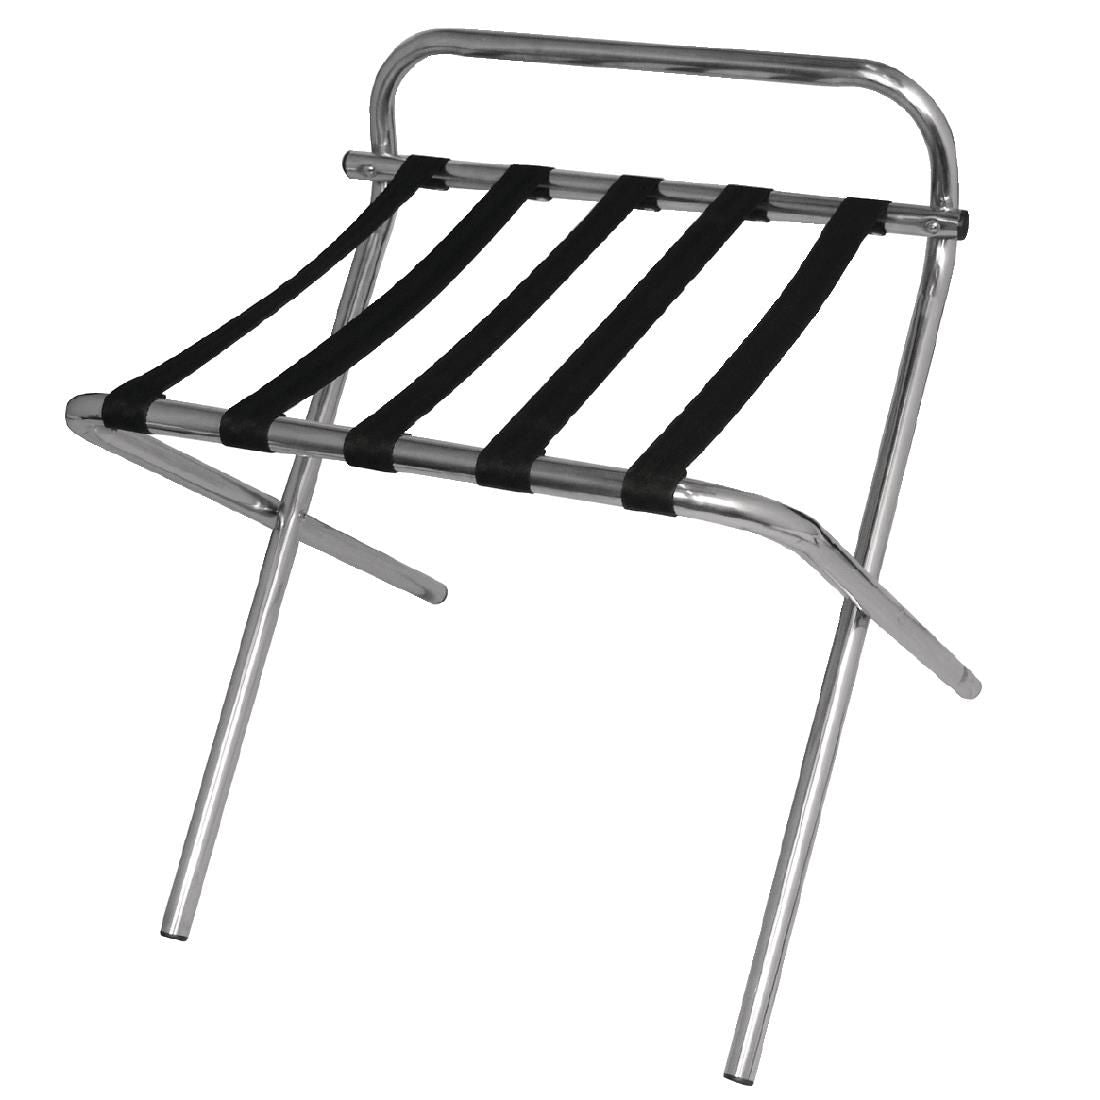 Bolero Rounded Luggage Rack JD Catering Equipment Solutions Ltd